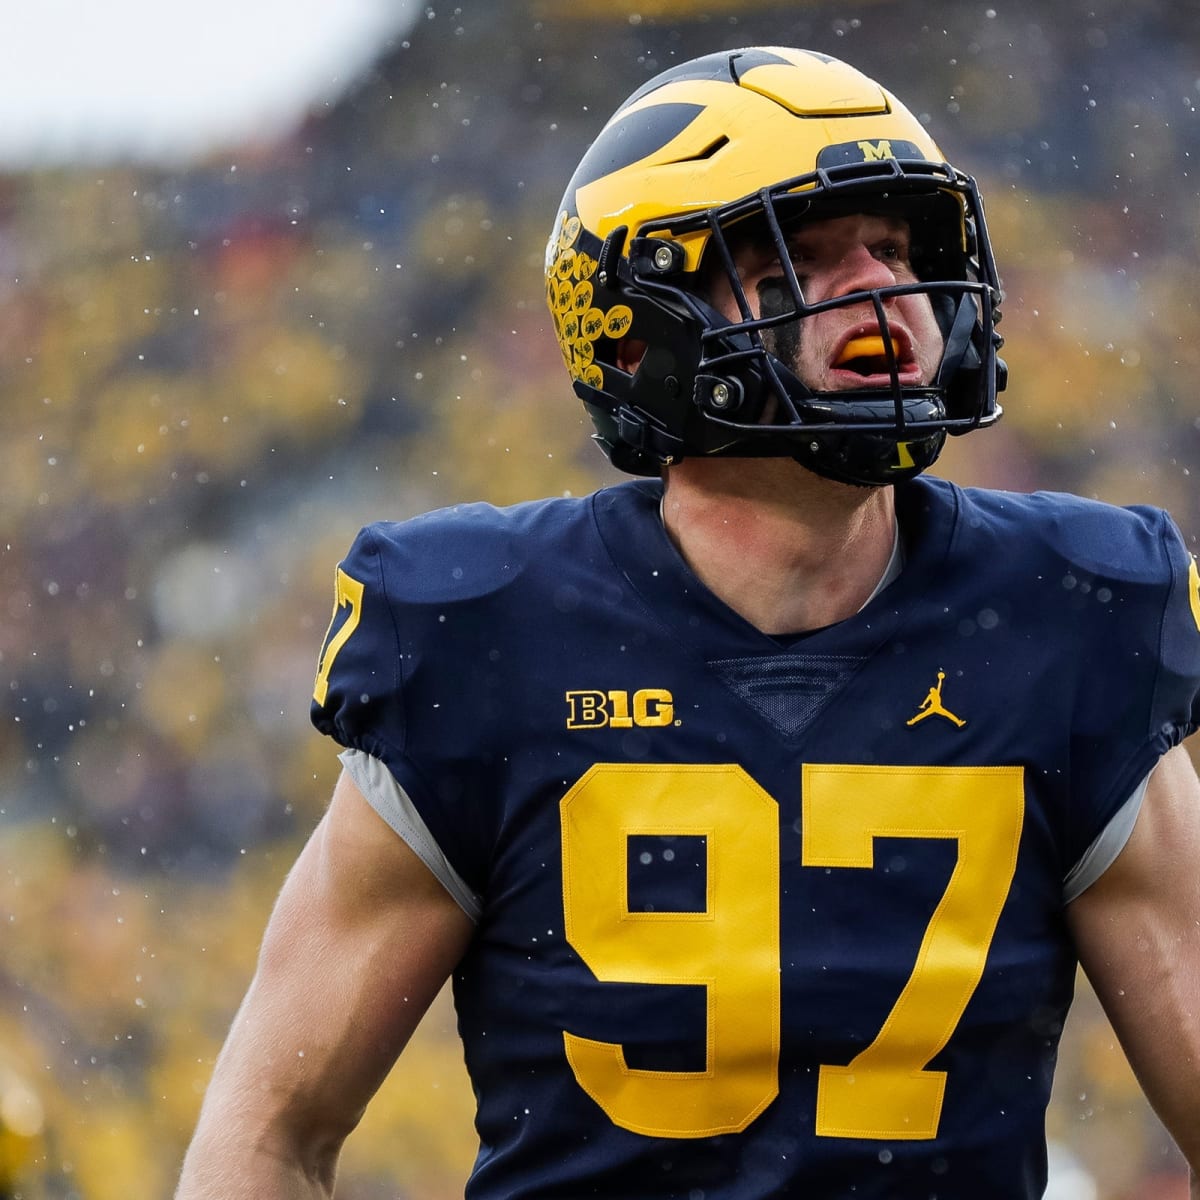 2022 NFL mock draft: Updated 2-round projections